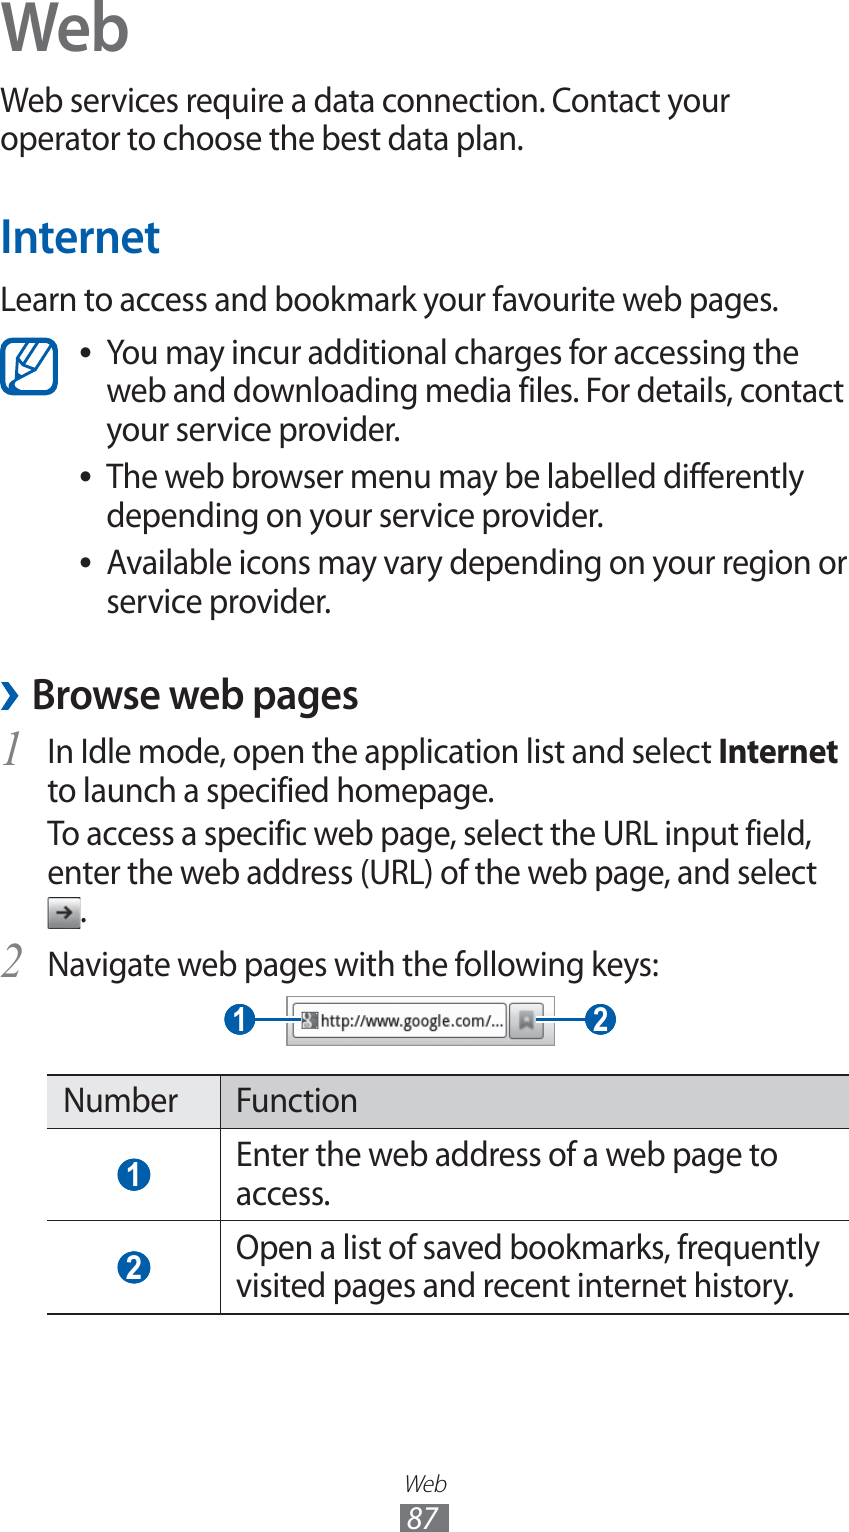 Web87WebWeb services require a data connection. Contact your operator to choose the best data plan.InternetLearn to access and bookmark your favourite web pages.You may incur additional charges for accessing the  ●web and downloading media files. For details, contact your service provider.The web browser menu may be labelled differently  ●depending on your service provider.Available icons may vary depending on your region or  ●service provider. ›Browse web pagesIn Idle mode, open the application list and select 1 Internet to launch a specified homepage.To access a specific web page, select the URL input field, enter the web address (URL) of the web page, and select .Navigate web pages with the following keys:2  2  1 Number Function 1 Enter the web address of a web page to access. 2 Open a list of saved bookmarks, frequently visited pages and recent internet history.